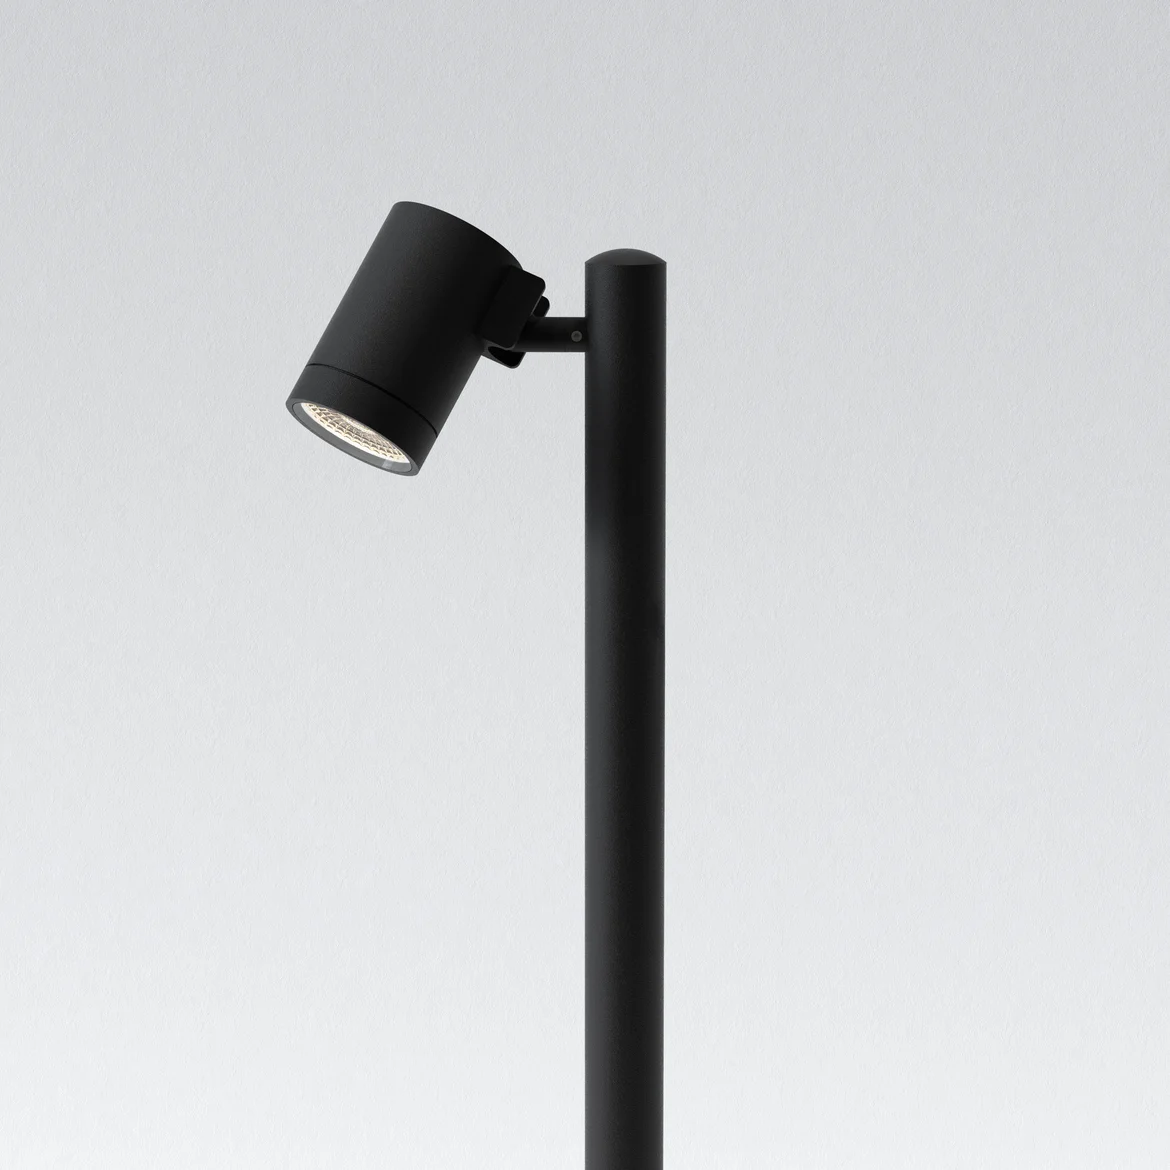 The Bayville Spike 900 spot light features a sleek, modern design with cylindrical body ending in a spike for outdoor in-ground installation with a mounted spotlight. Made from steel and available in a textured black finish. IP66 rated and suitable for outdoor use. Comes complete with an integrated 8.1W LED in 3000K.